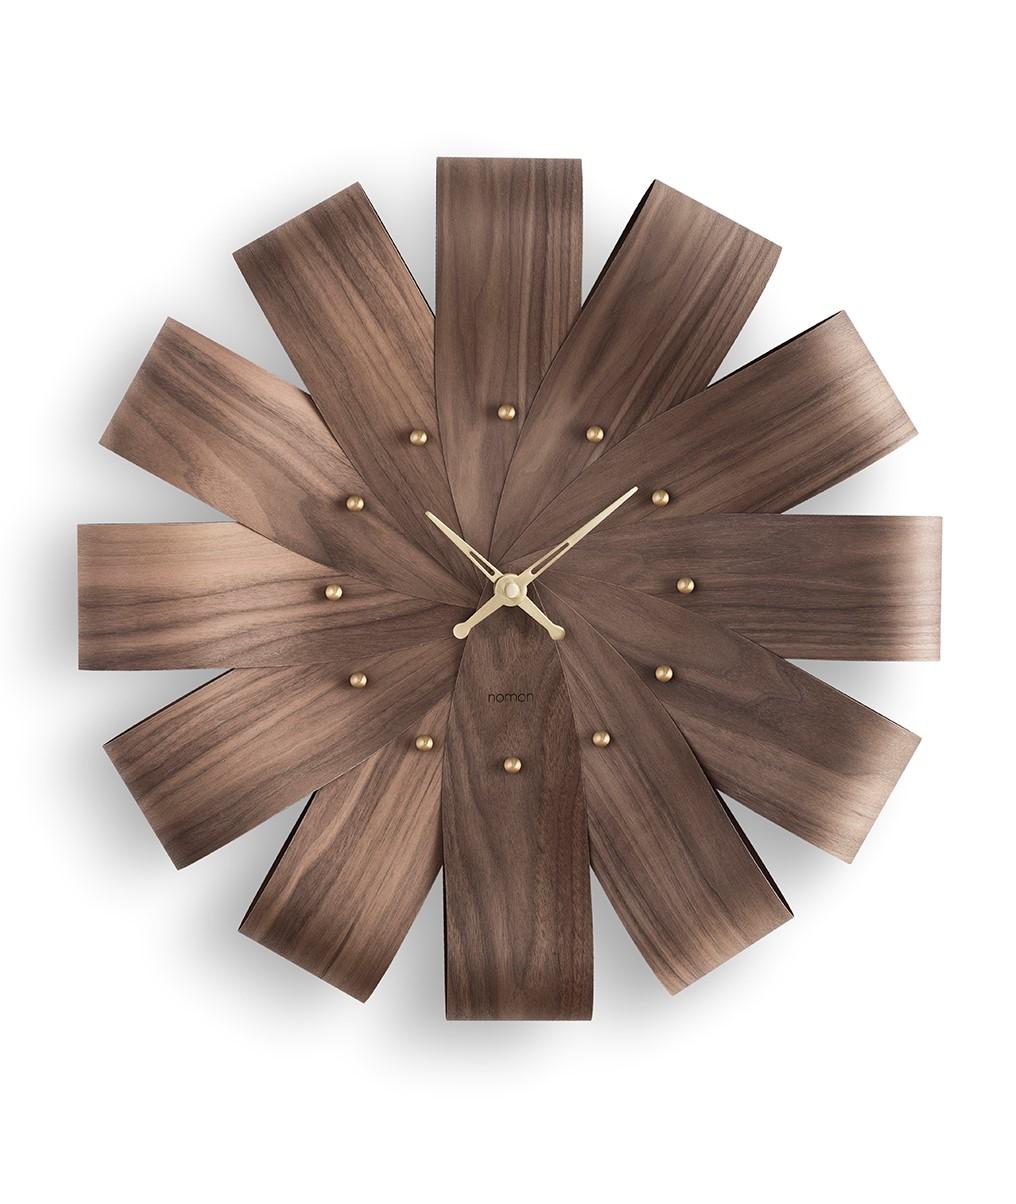 FOR THE FIRST TIME, NOMON WORKS WITH SUBTLY FOLDED WOODEN STRIPS. THE SILHOUETTE CONNECTS US WITH NATURE, EMULATING AN OPEN FLOWER IN ALL ITS SPLENDOR.
Clock made with natural walnut or oak sheets.
The subtle folds of curved wood create